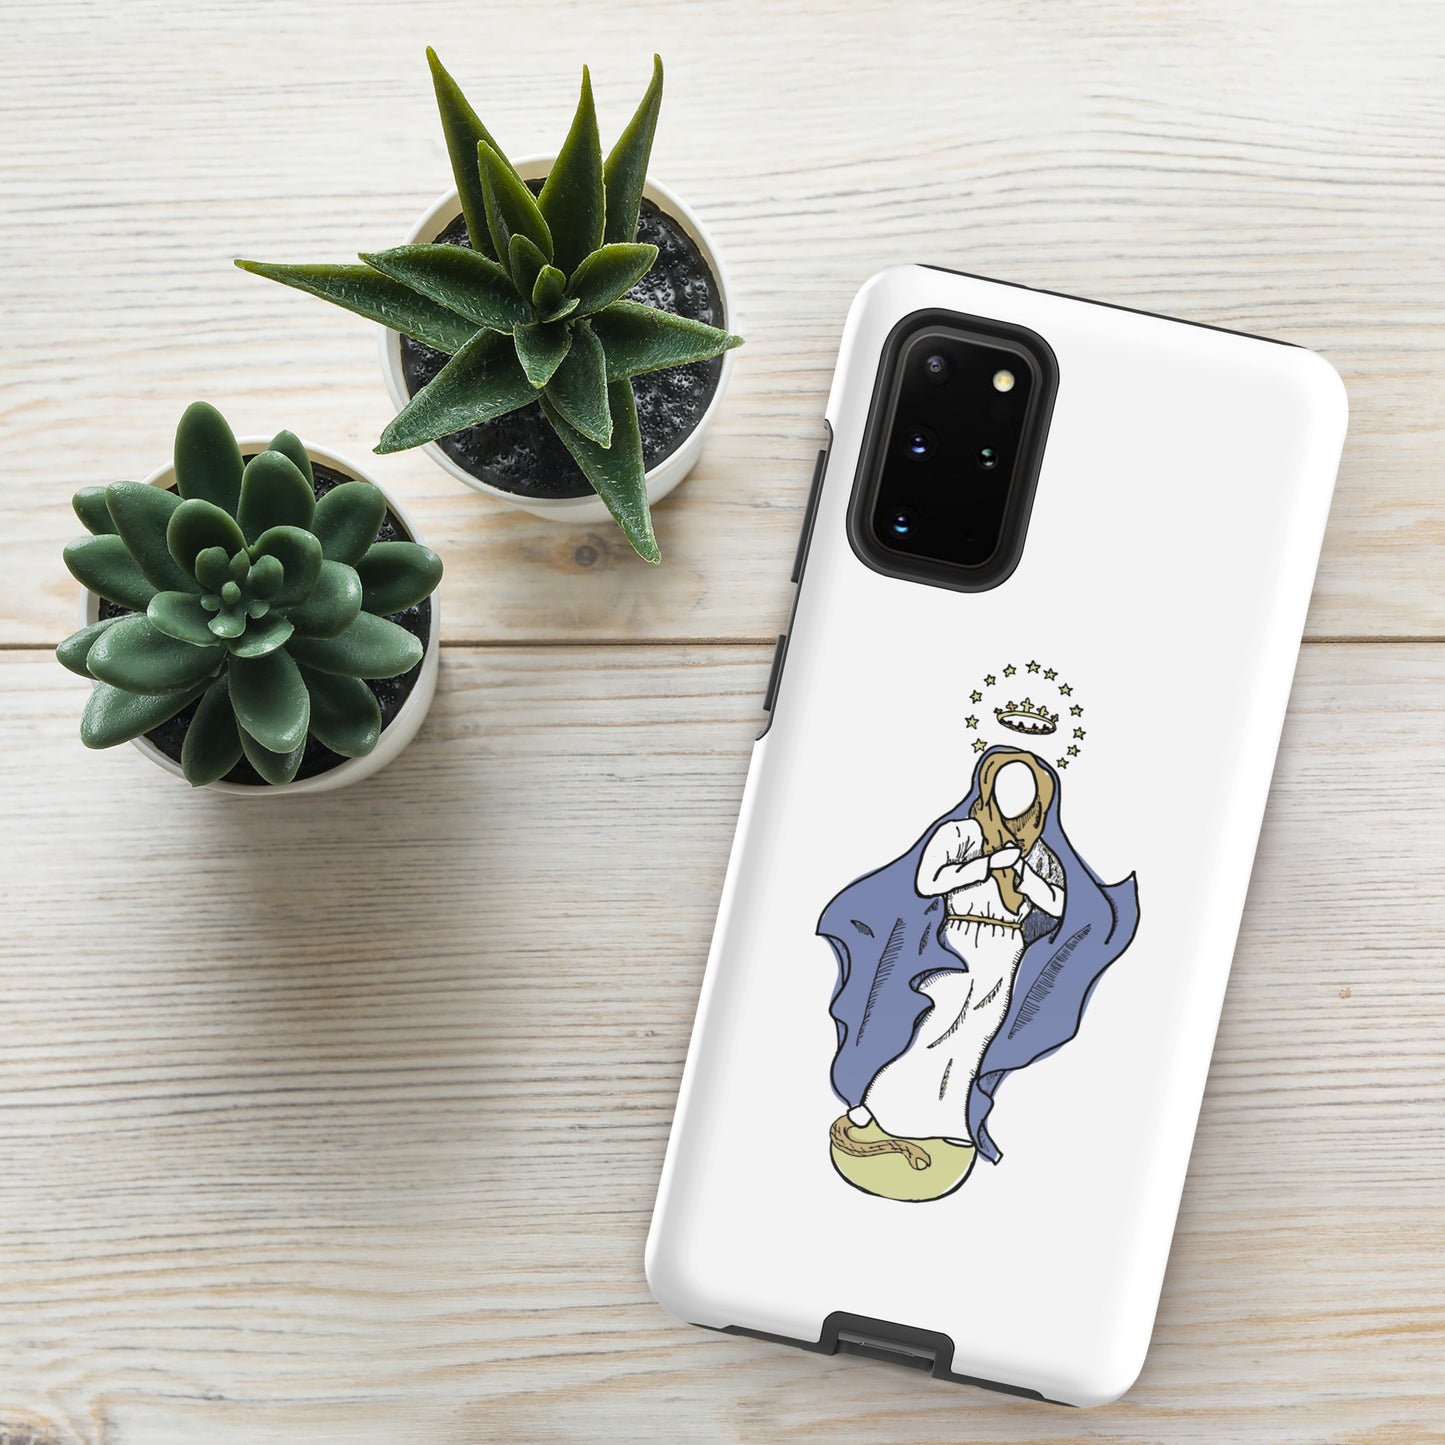 "Our Lady, Queen of Heaven" - Samsung Case